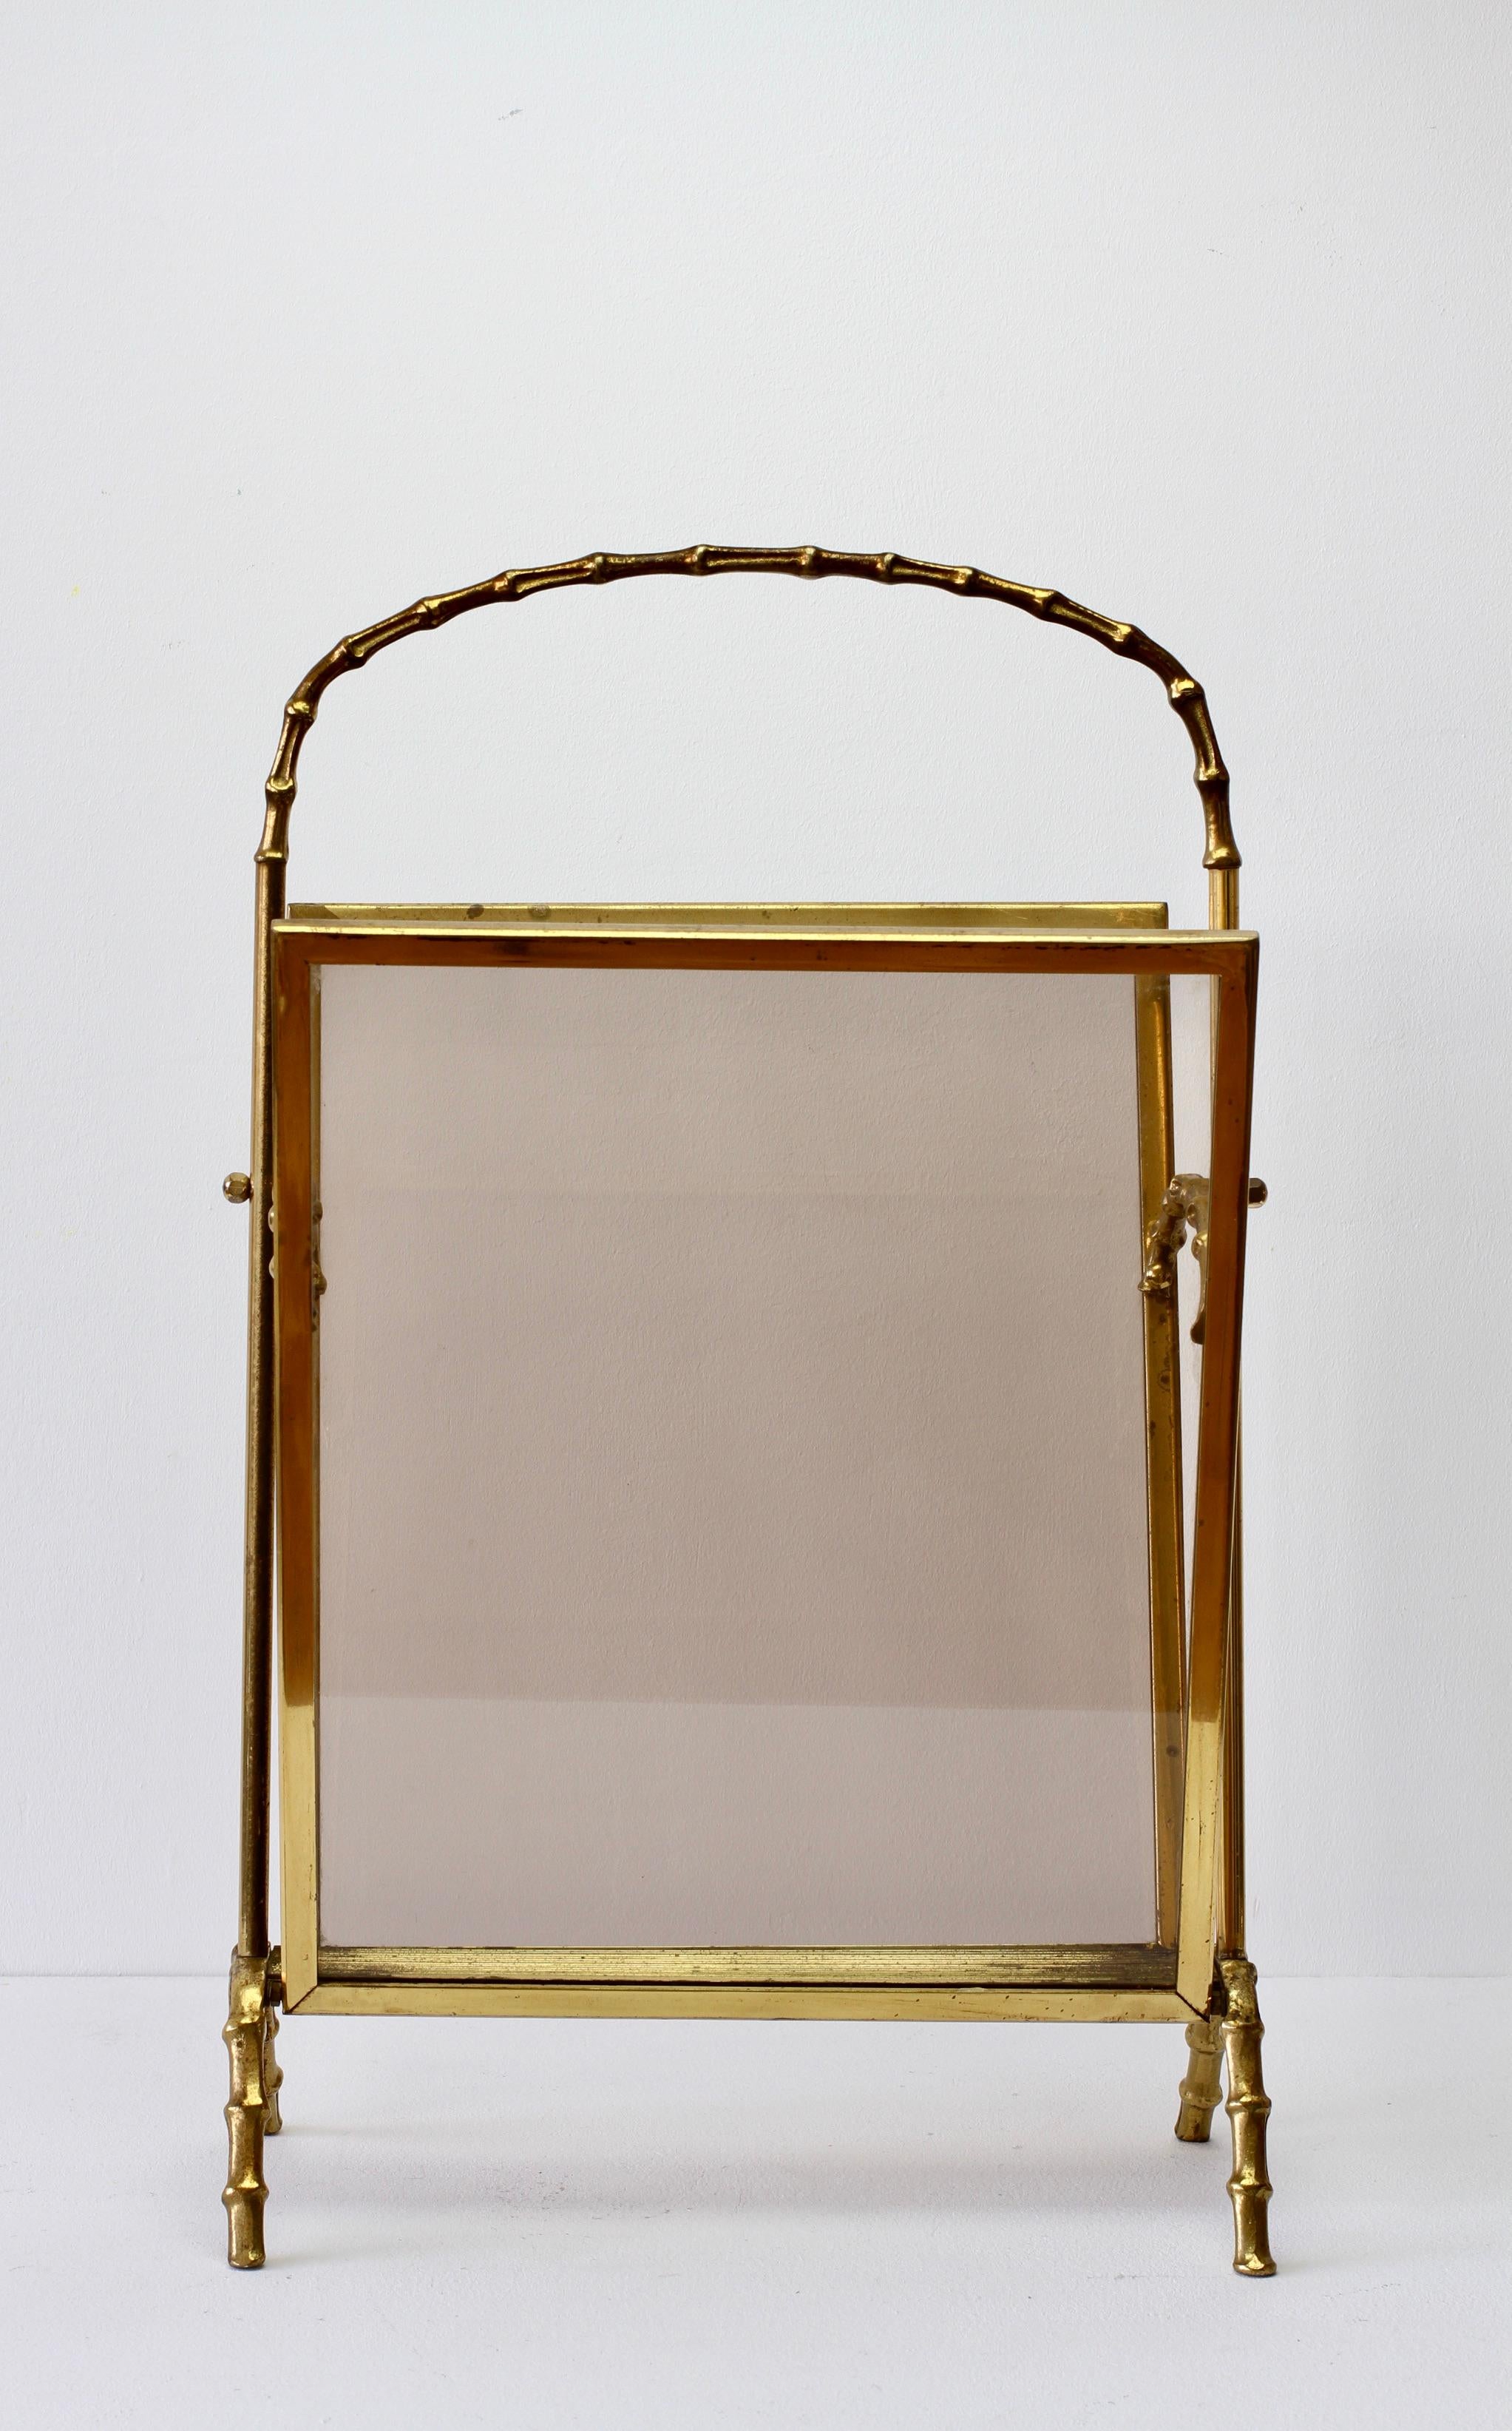 Maison Baguès attributed cast brass and smoked dark toned glass magazine / newspaper / book rack, holder or stand - perfect for the Hollywood Regency style - in faux bamboo. Made in France circa 1950s, perfect for any midcentury collector or